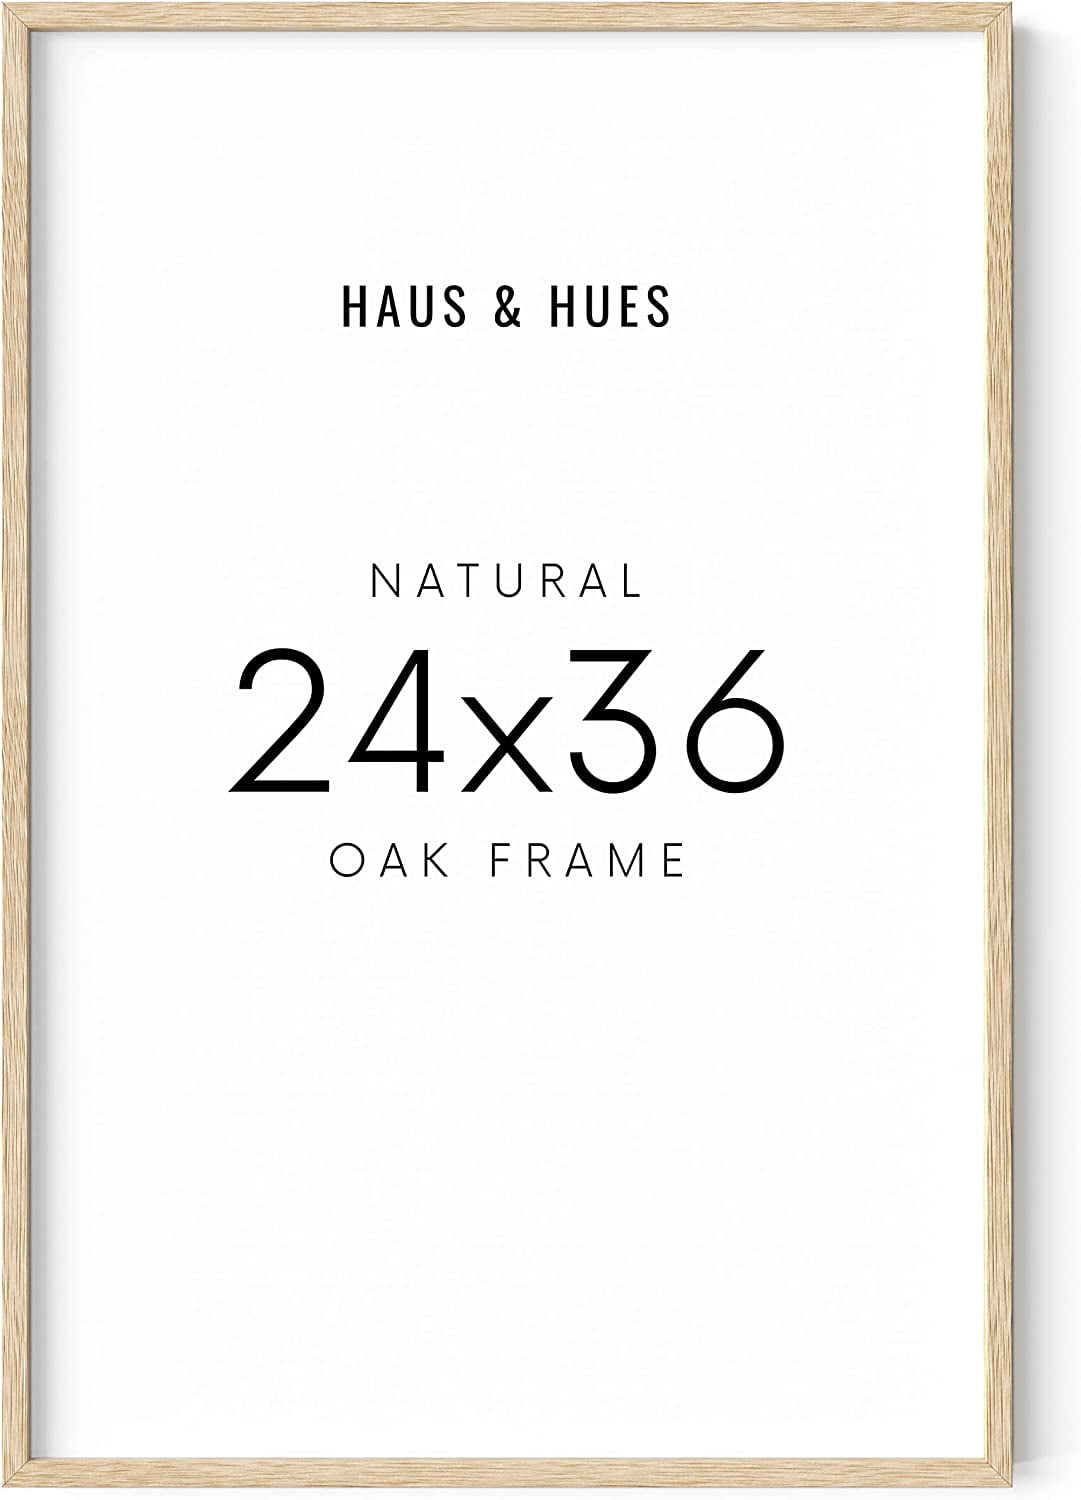 Natural Oak Frame Haus and Hues Color: Beige, Picture Size: 16 x 20